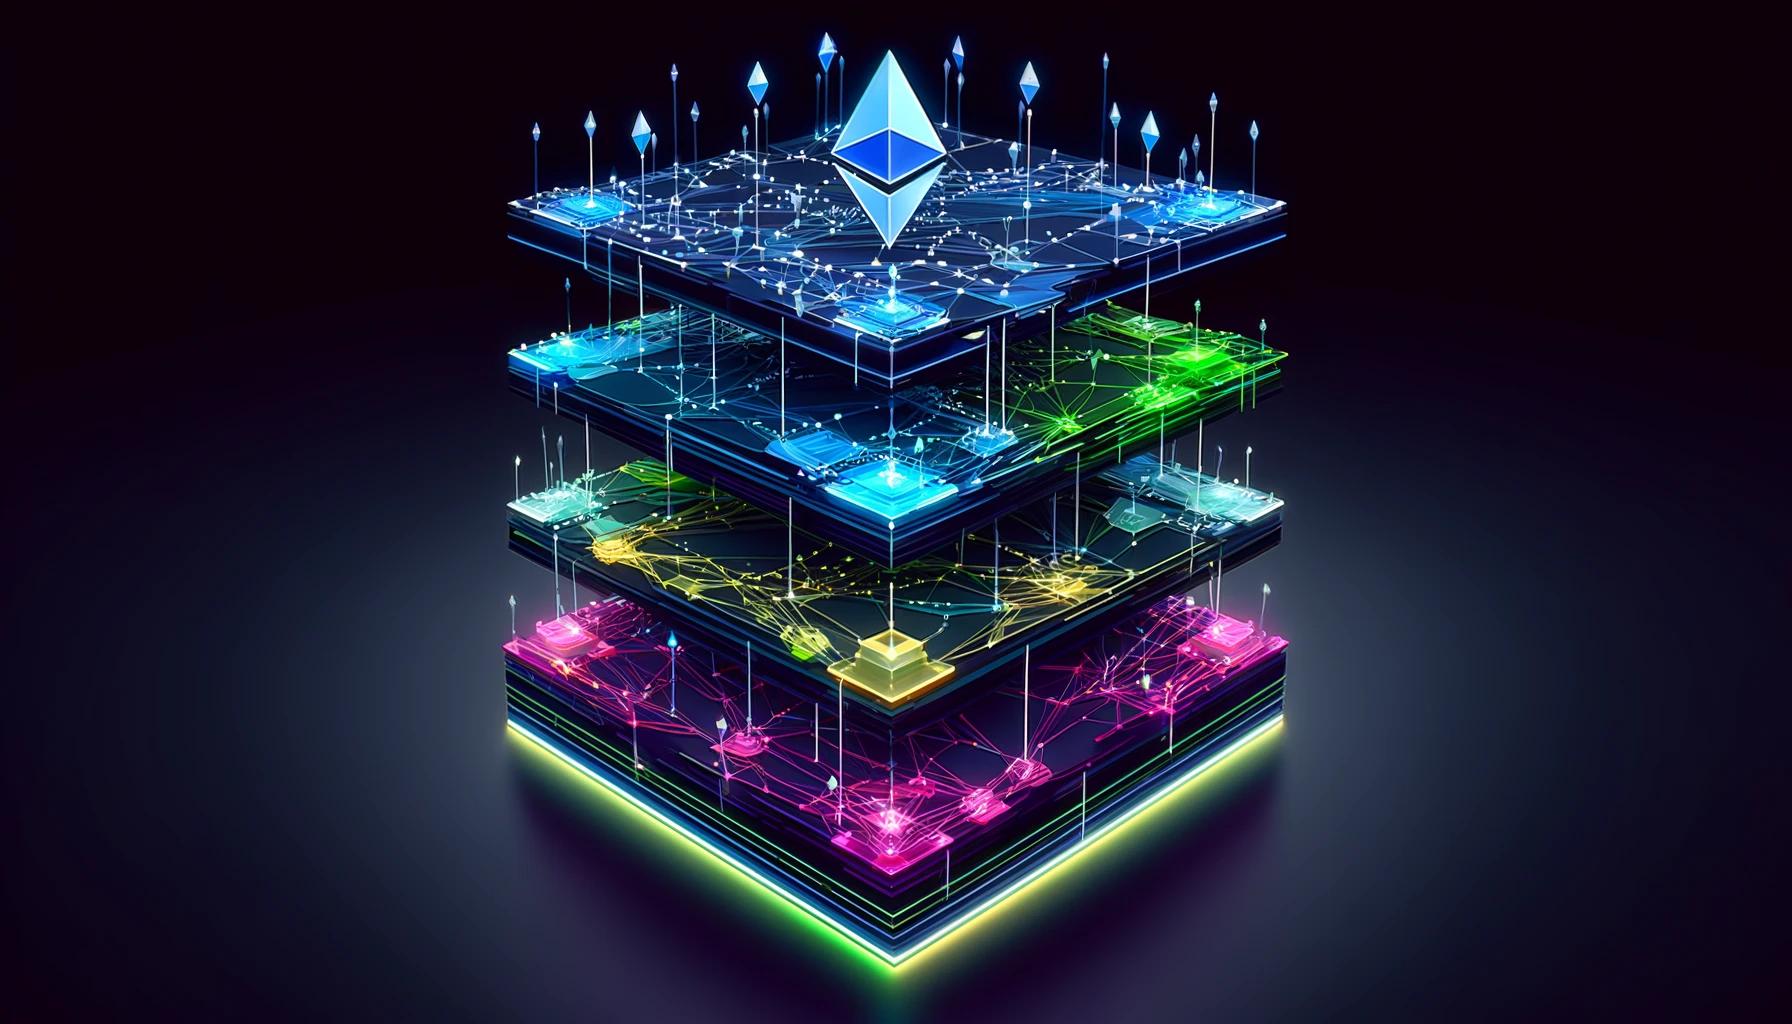 Lido Proposes Alliance Promoting stETH-Based Restaking Ecosystem - The Defiant